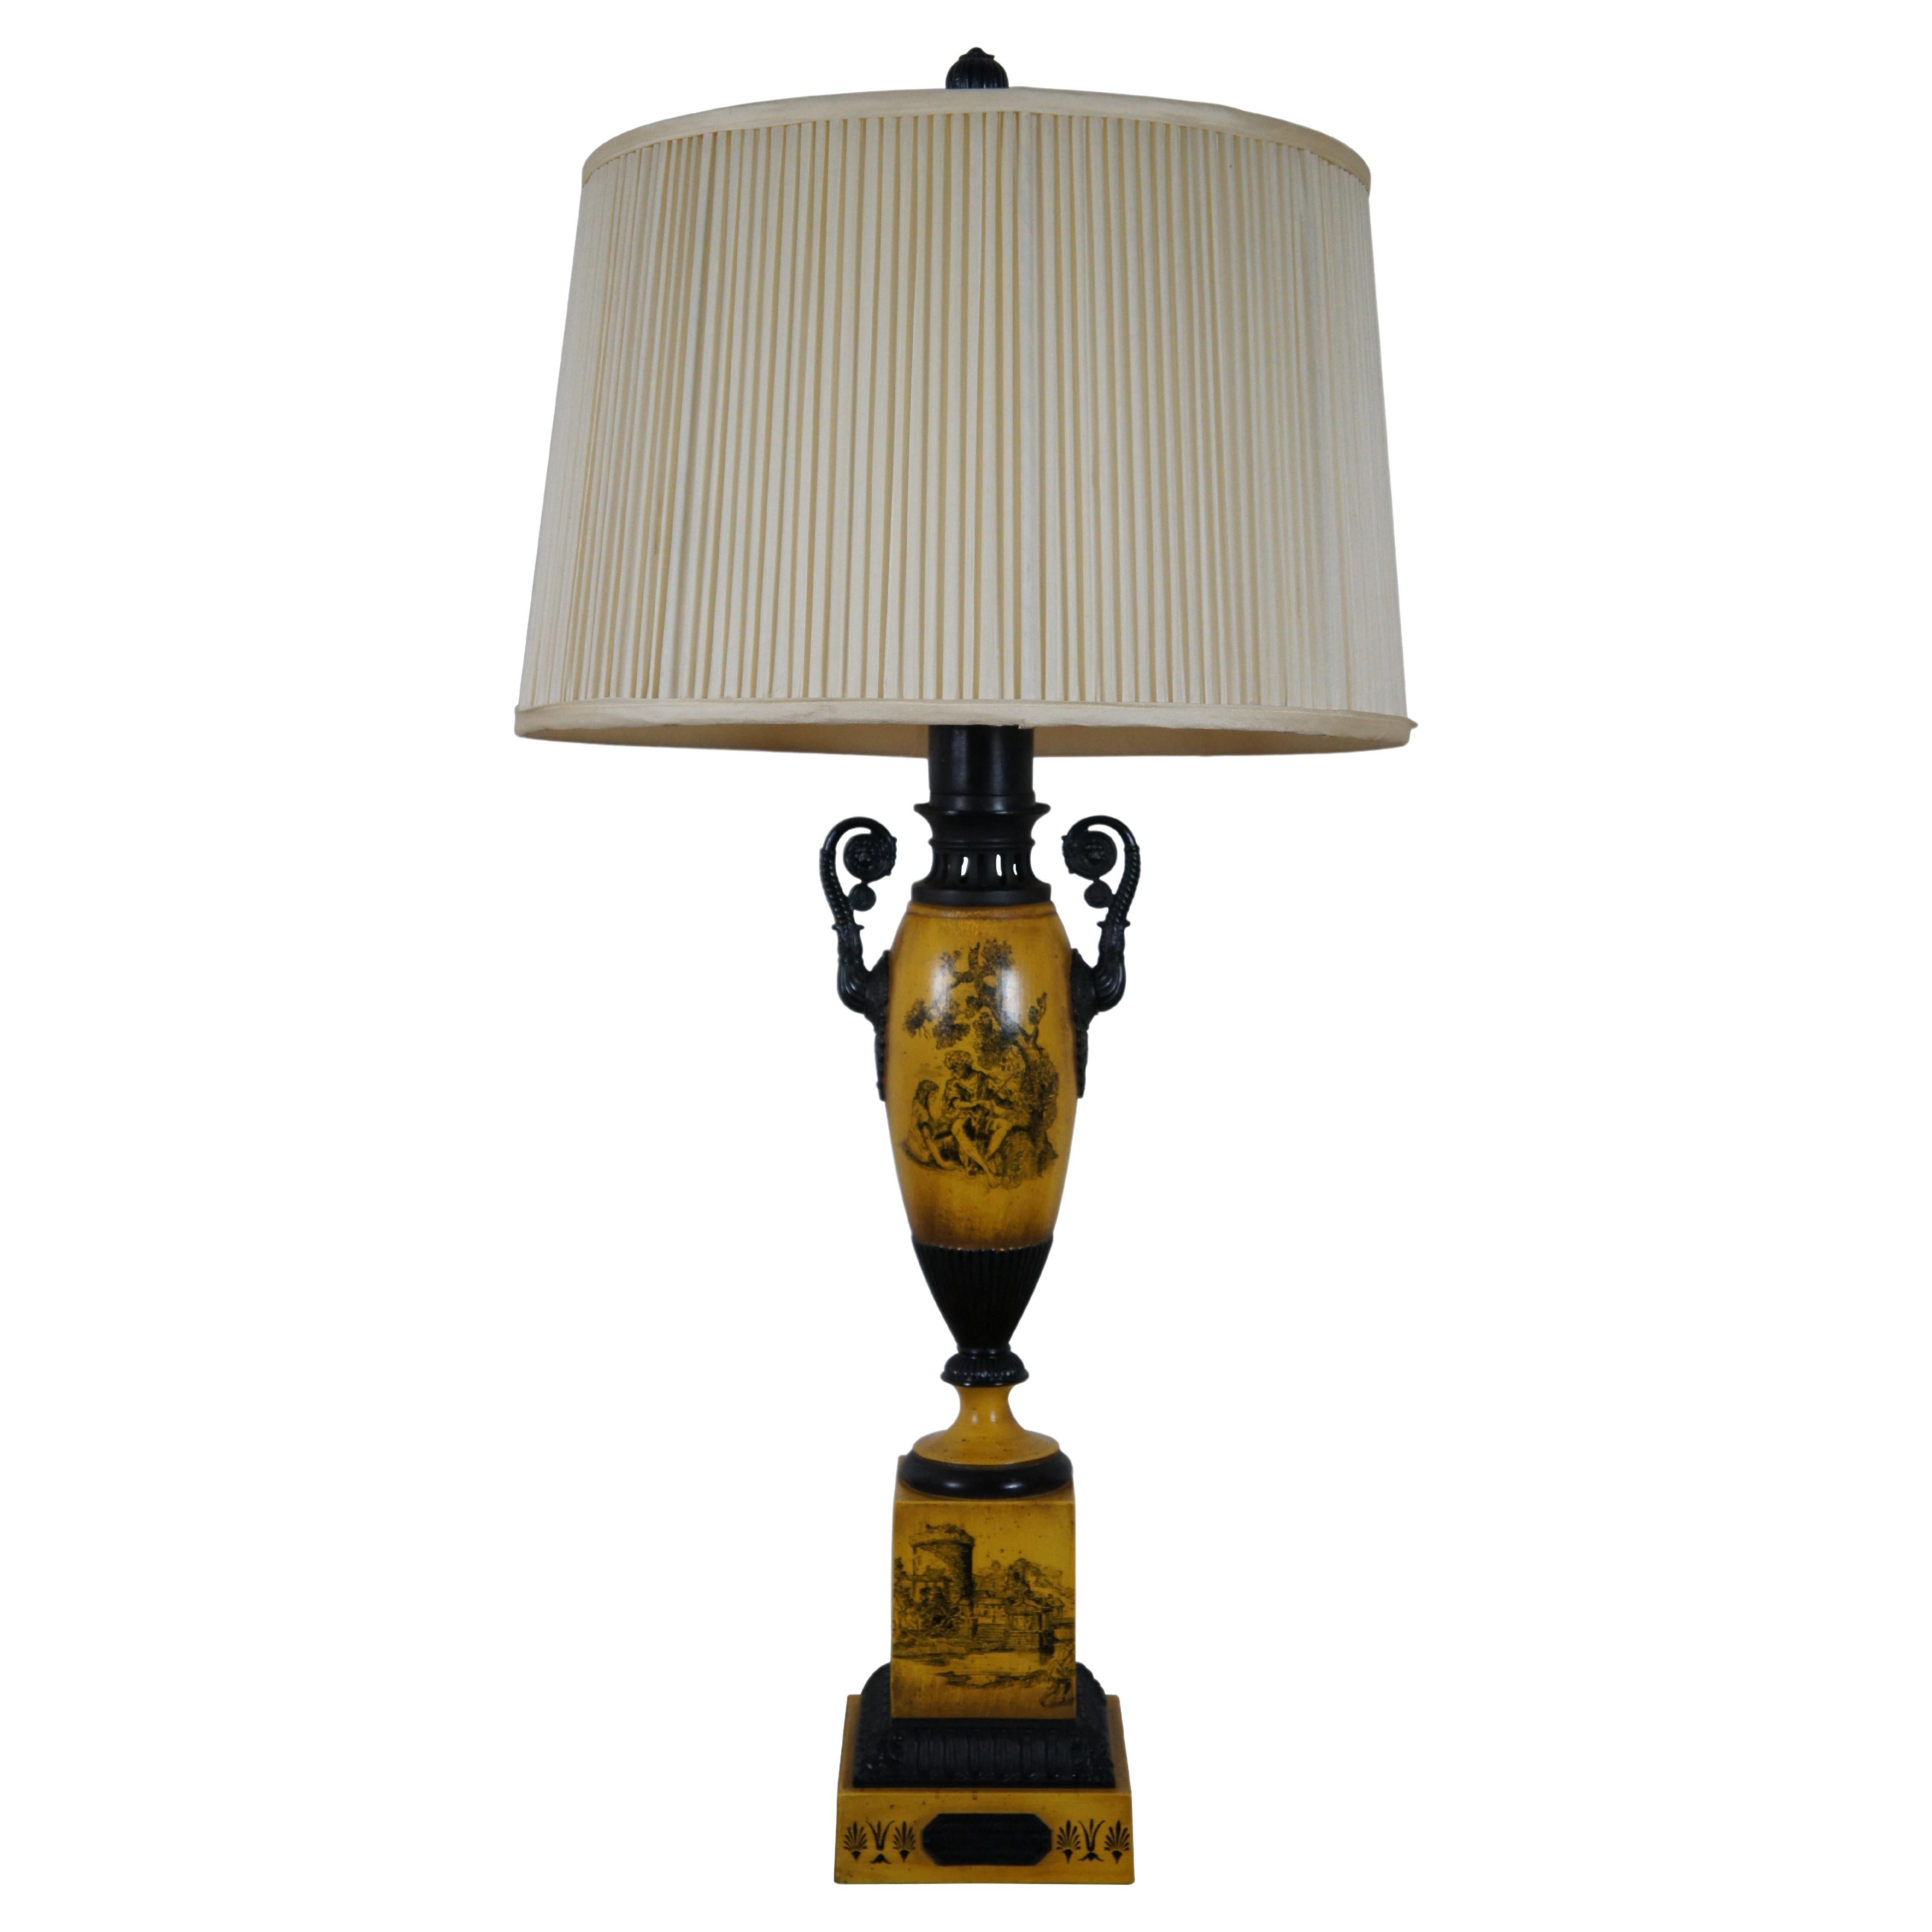 Vintage French Empire Neoclassical Tole Urn Lamp Yellow Toile Table Buffet Light For Sale